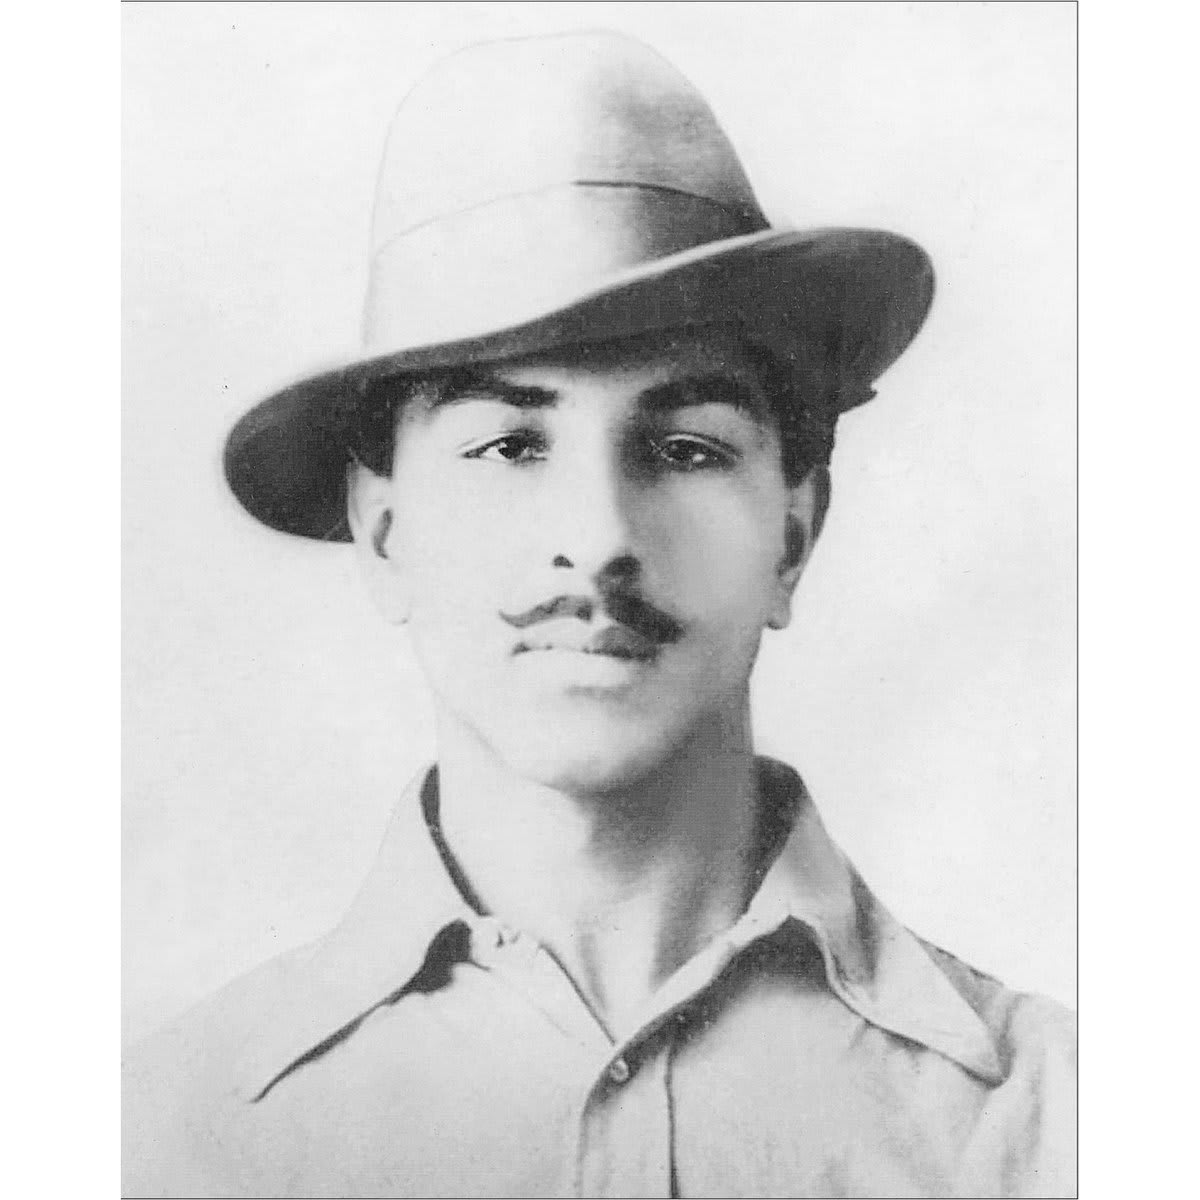 OtD 28 Sep 1907 socialist revolutionary and anti-colonialist Bhagat Singh was born in India. An advocate of working class uprising, he attacked Gandhi for his fear of the proletariat. He was executed by the British in 1931.